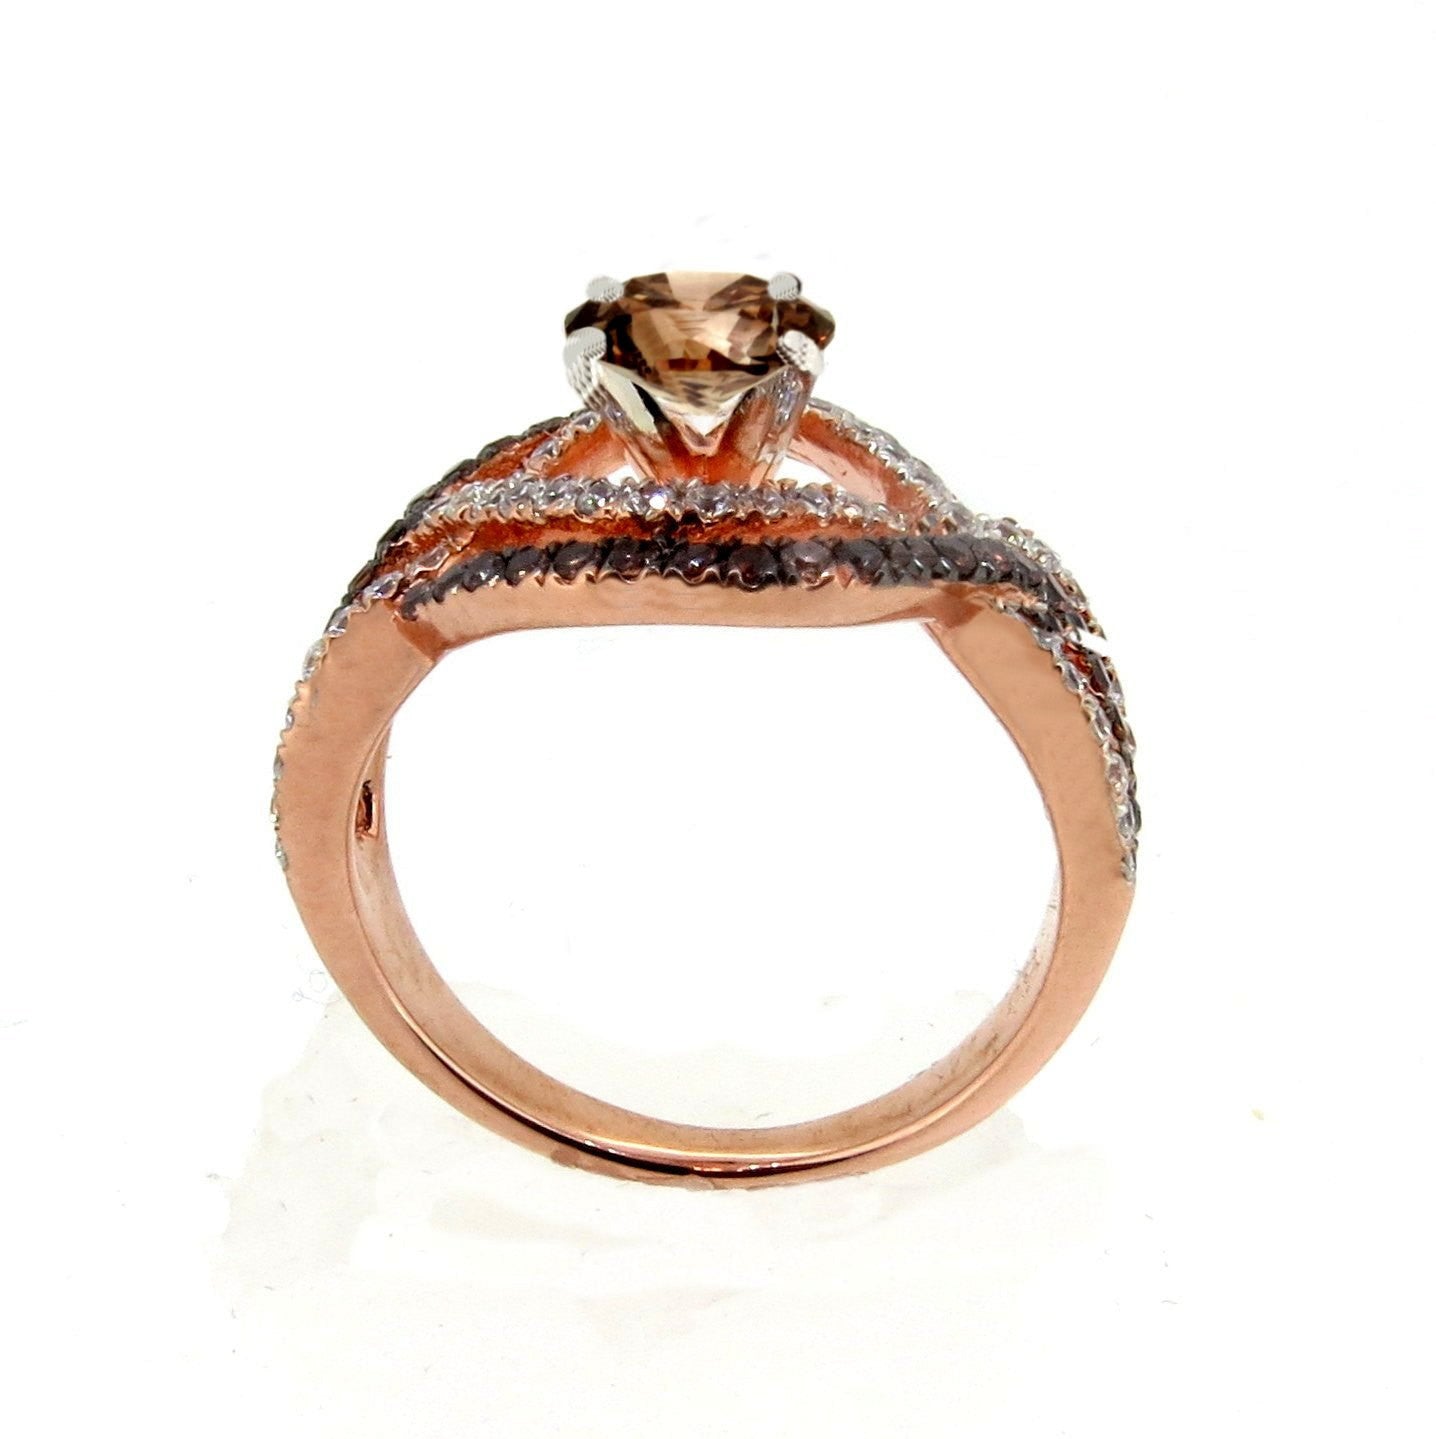 Unique Halo Infinity 1 Carat Fancy Brown Diamond Engagement Ring with Rose Gold, White & Brown Diamond Accent Stones, Anniversary Ring - BD94645